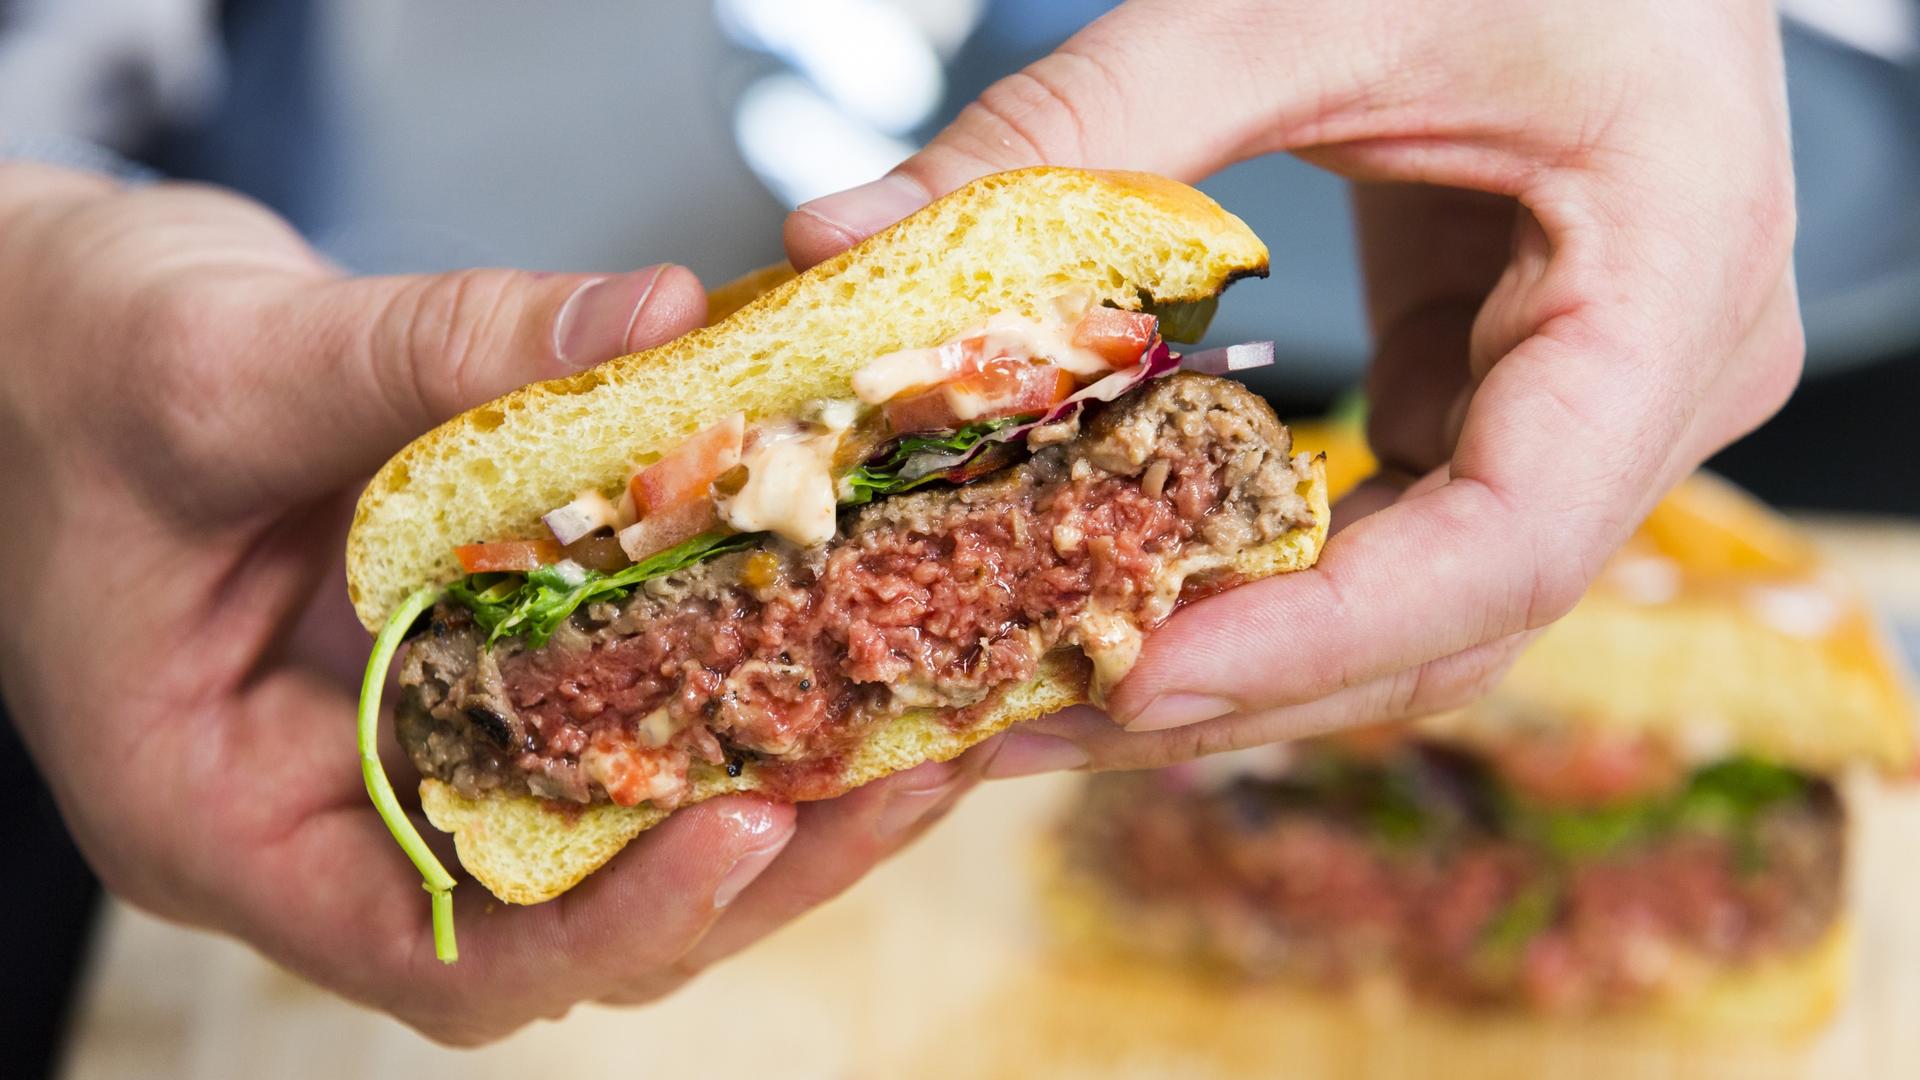 The Impossible Burger is designed to “bleed” like a traditional beef hamburger. 